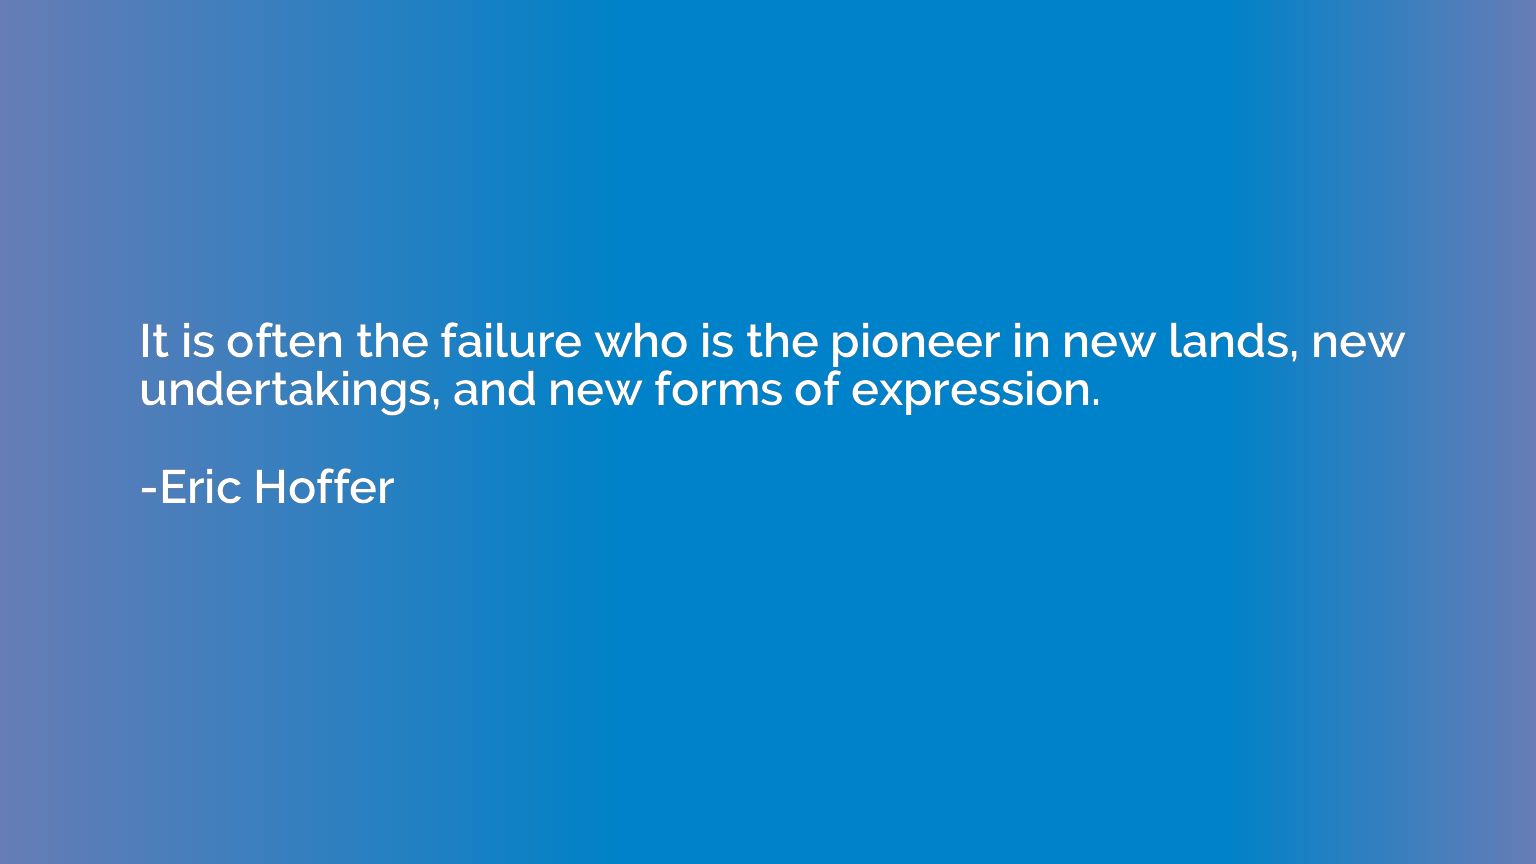 It is often the failure who is the pioneer in new lands, new